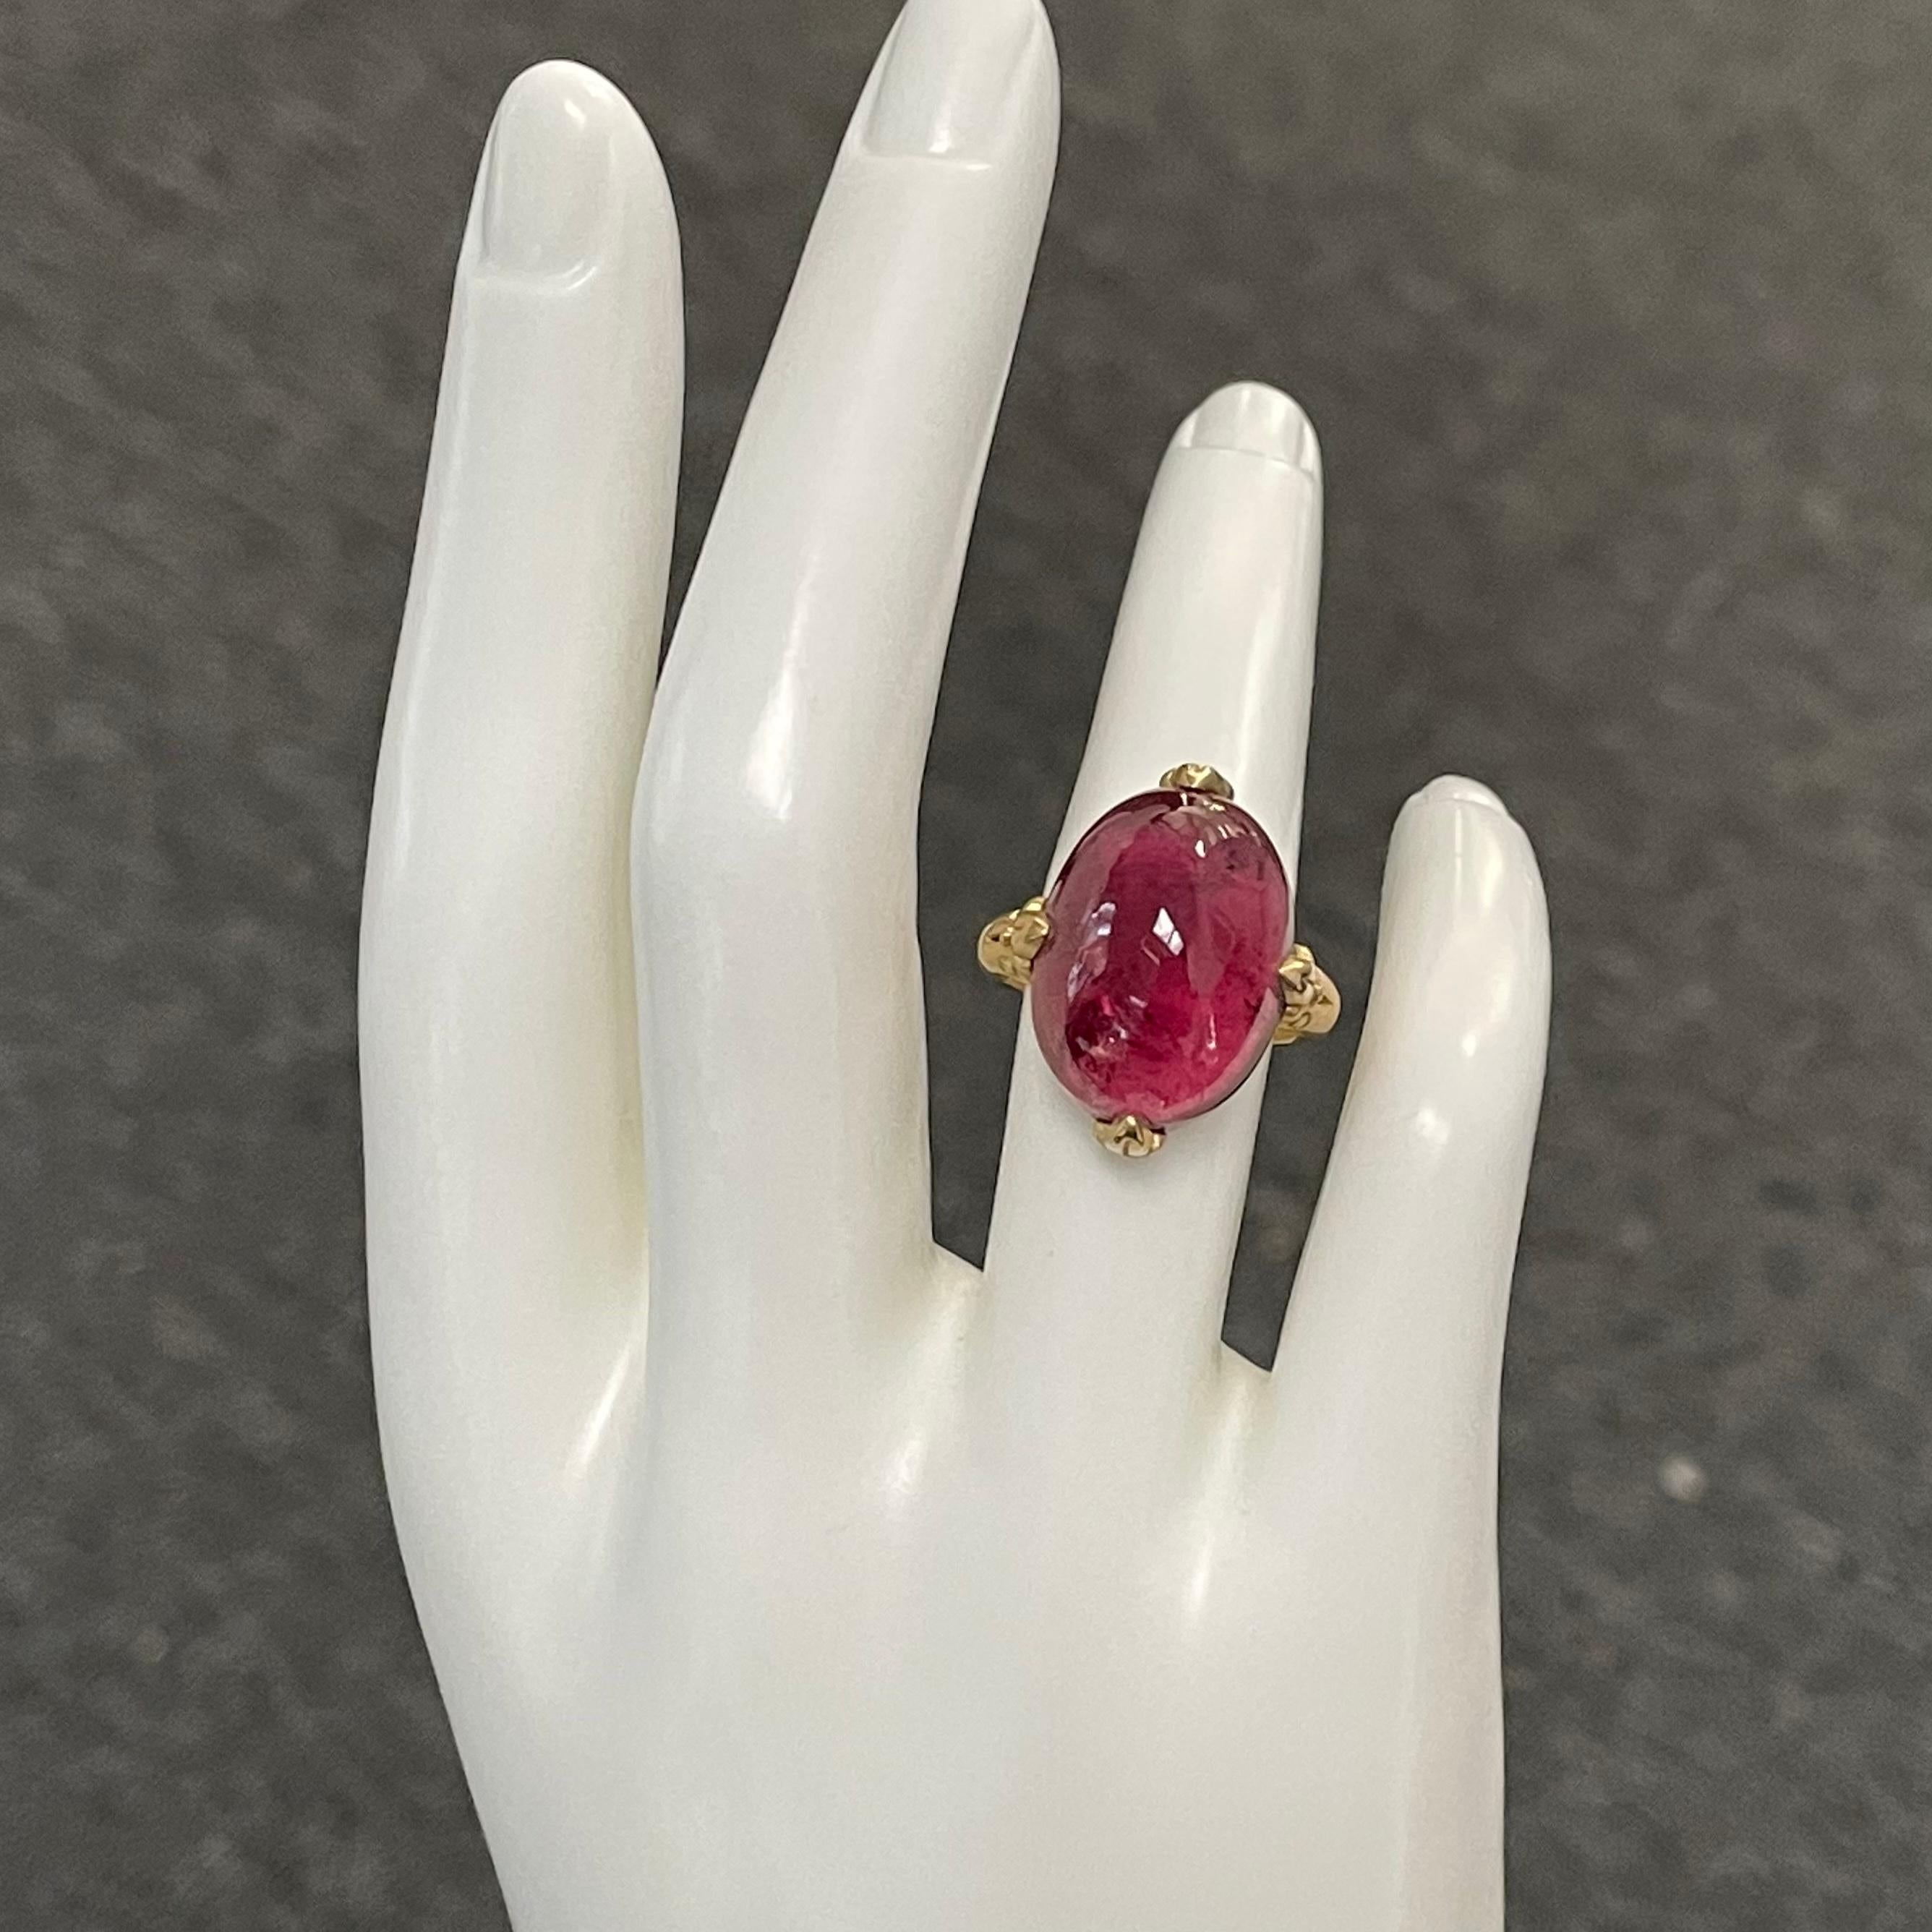 A clear 13 x 18 mm cabochon cut salmon pink tourmaline is held in 4 carved prongs in this Steven Battelle designed 18K gold setting.  This allows for lots of light interplay and a lively stone.  
A tapered matte finish shank currently sized 7